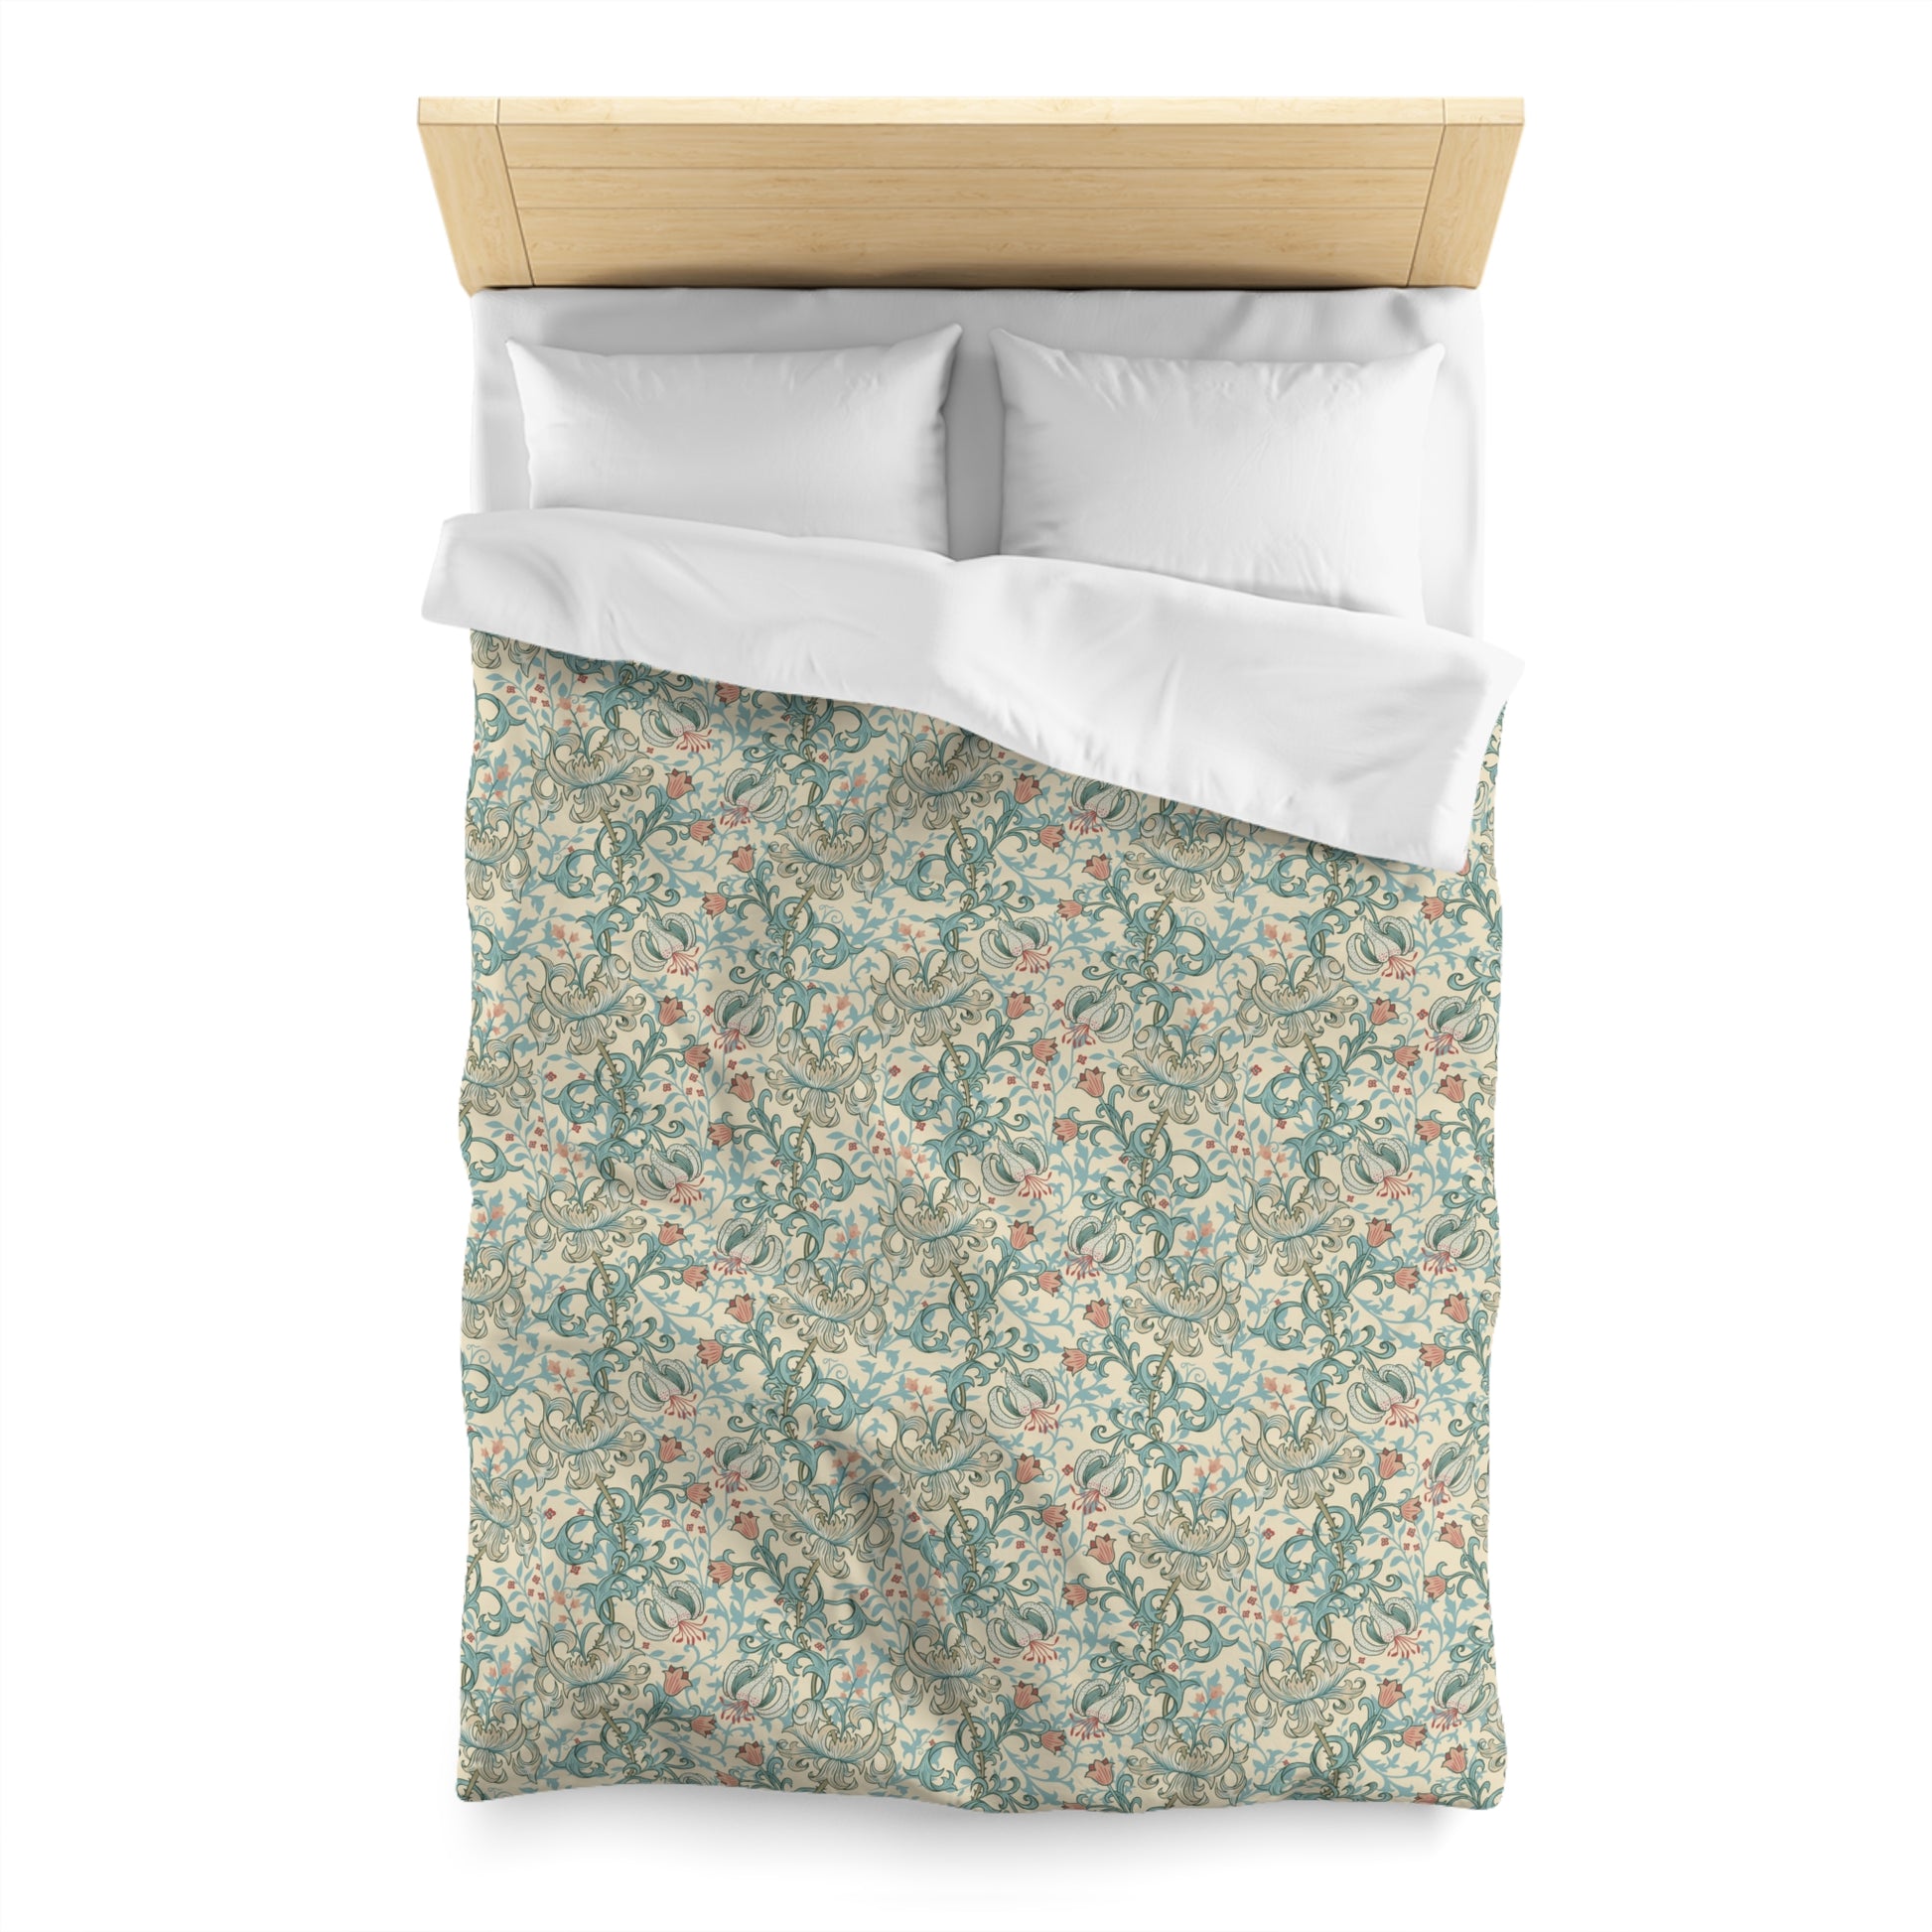 william-morris-co-duvet-cover-golden-lily-collection-mineral-4